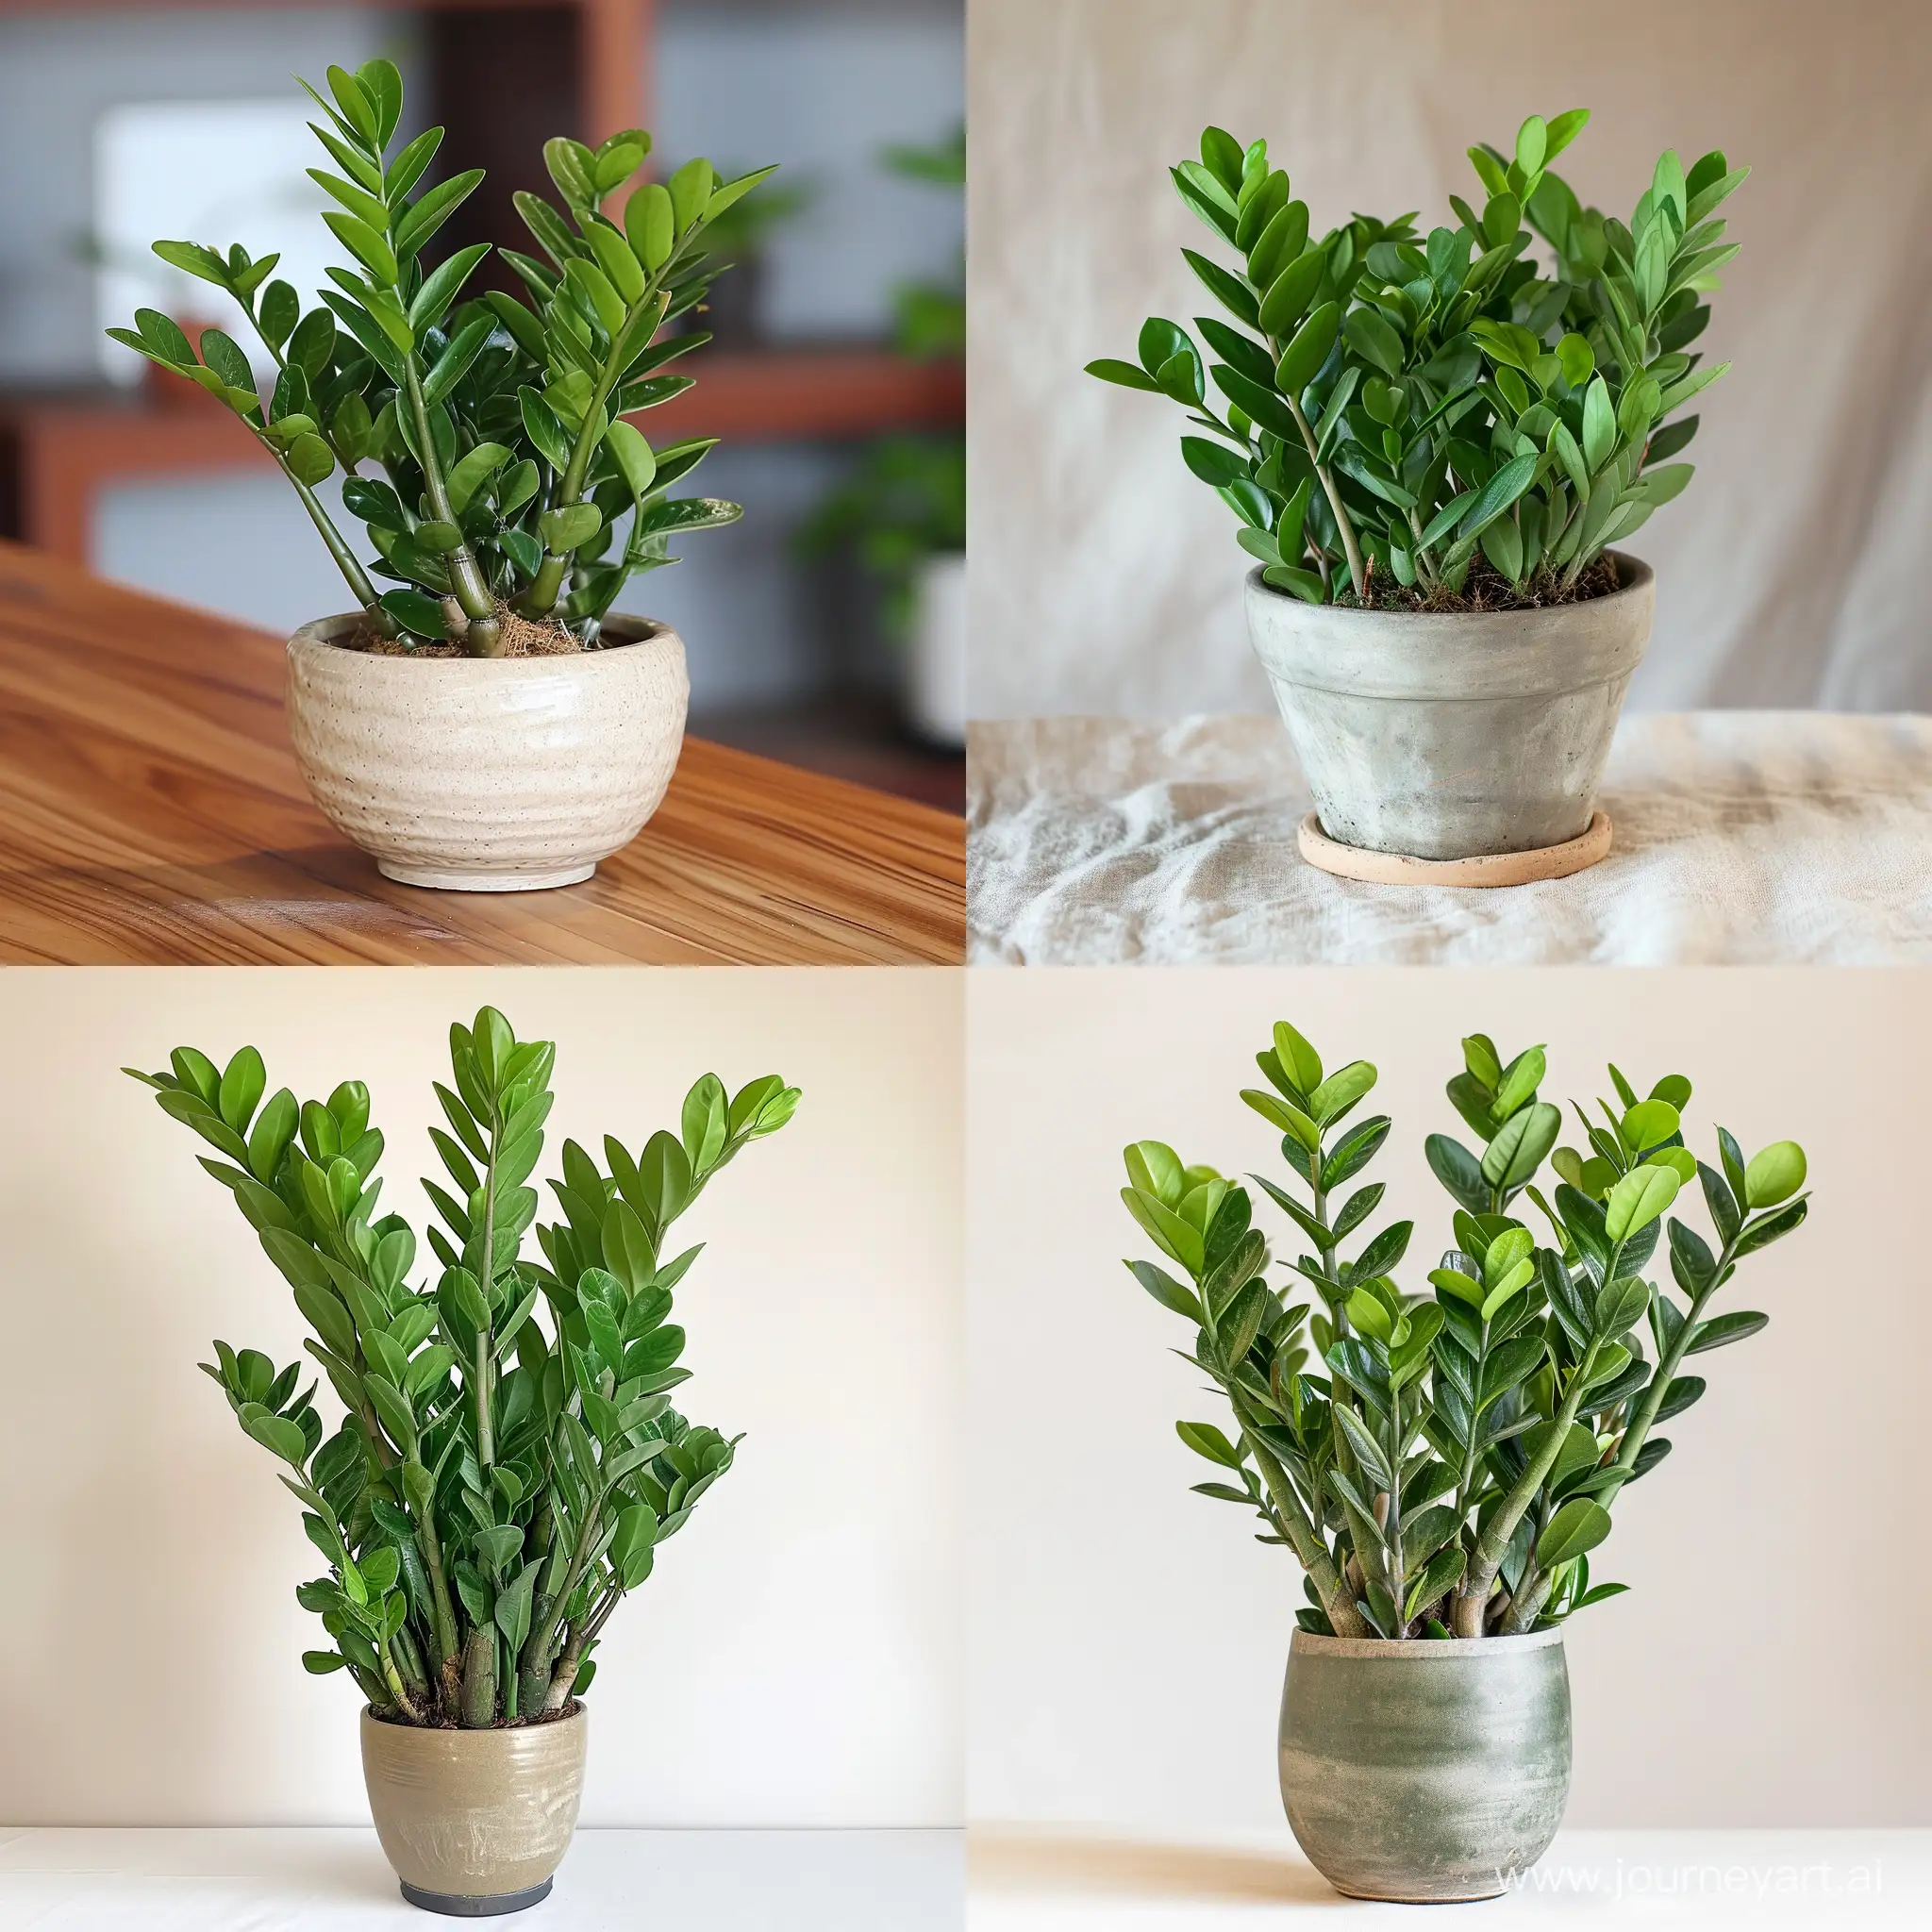 Lush-Zamioculcas-Plant-in-Vibrant-Greenery-Natures-Tranquil-Beauty